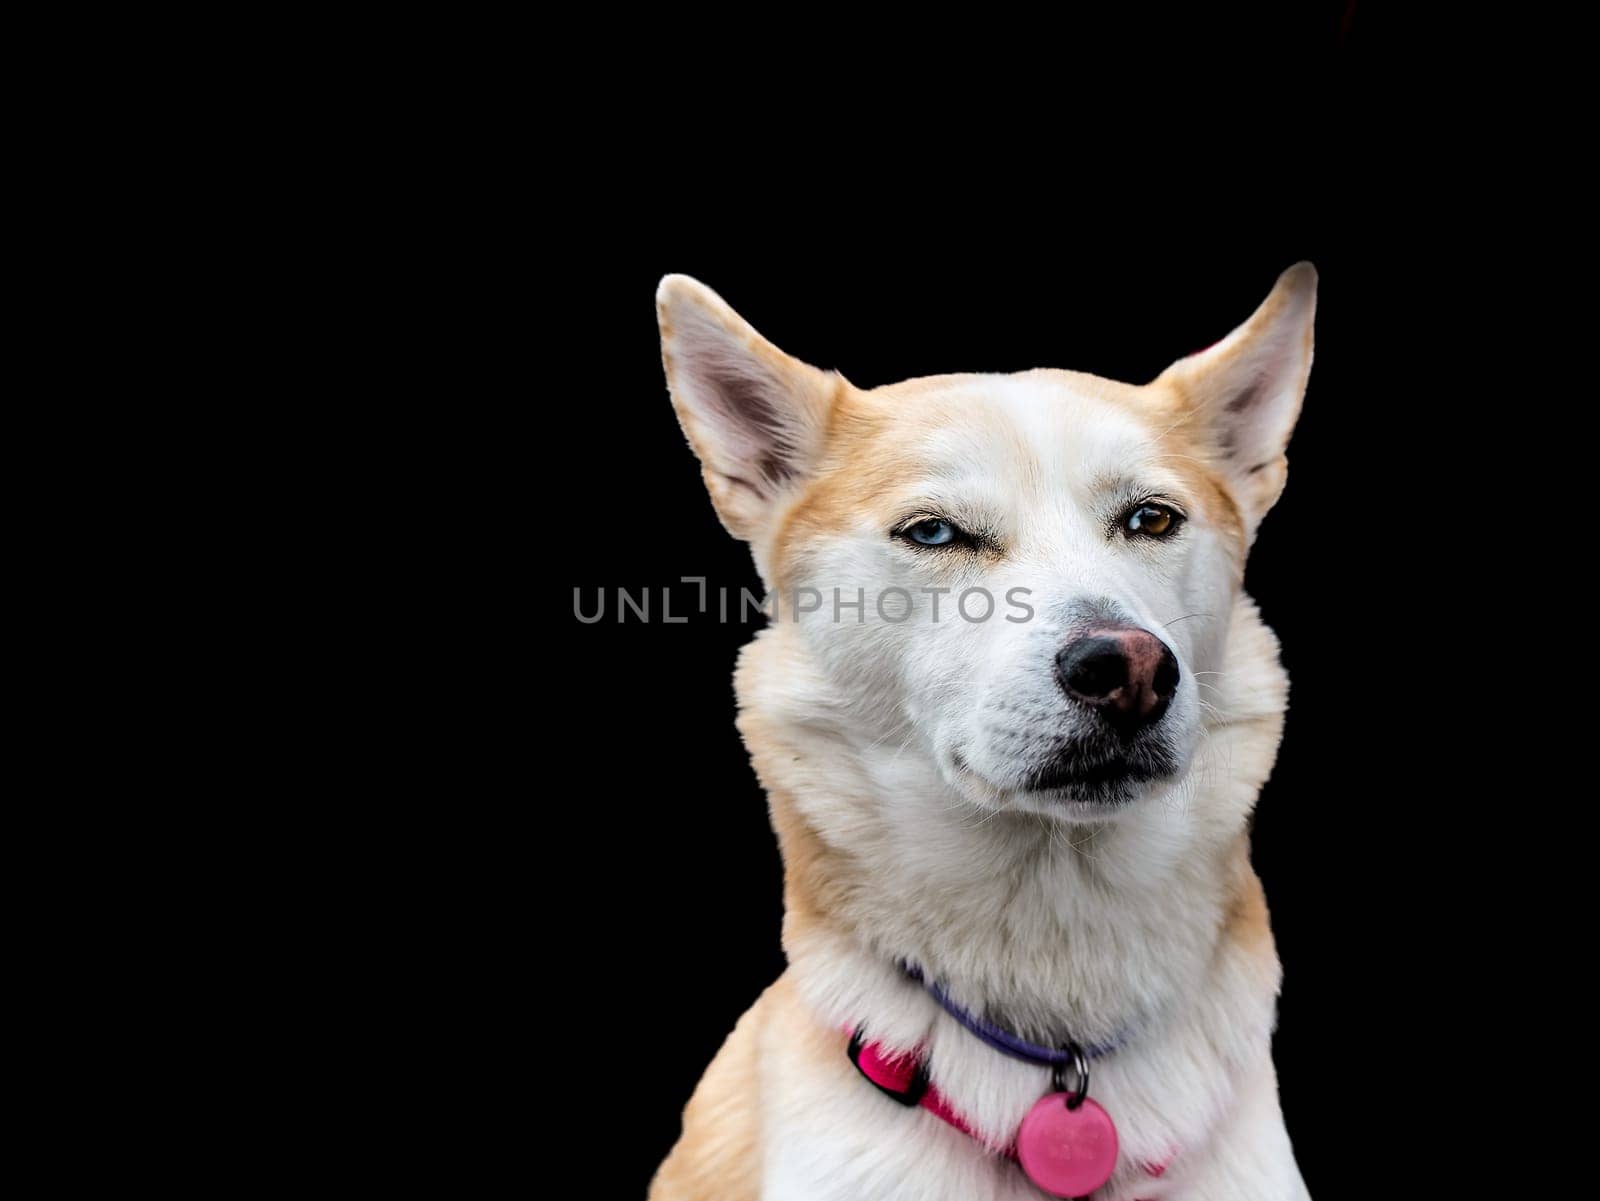 Close-up portrait of a white dog with heterochromia. Eyes of different colors. isolate on balck background